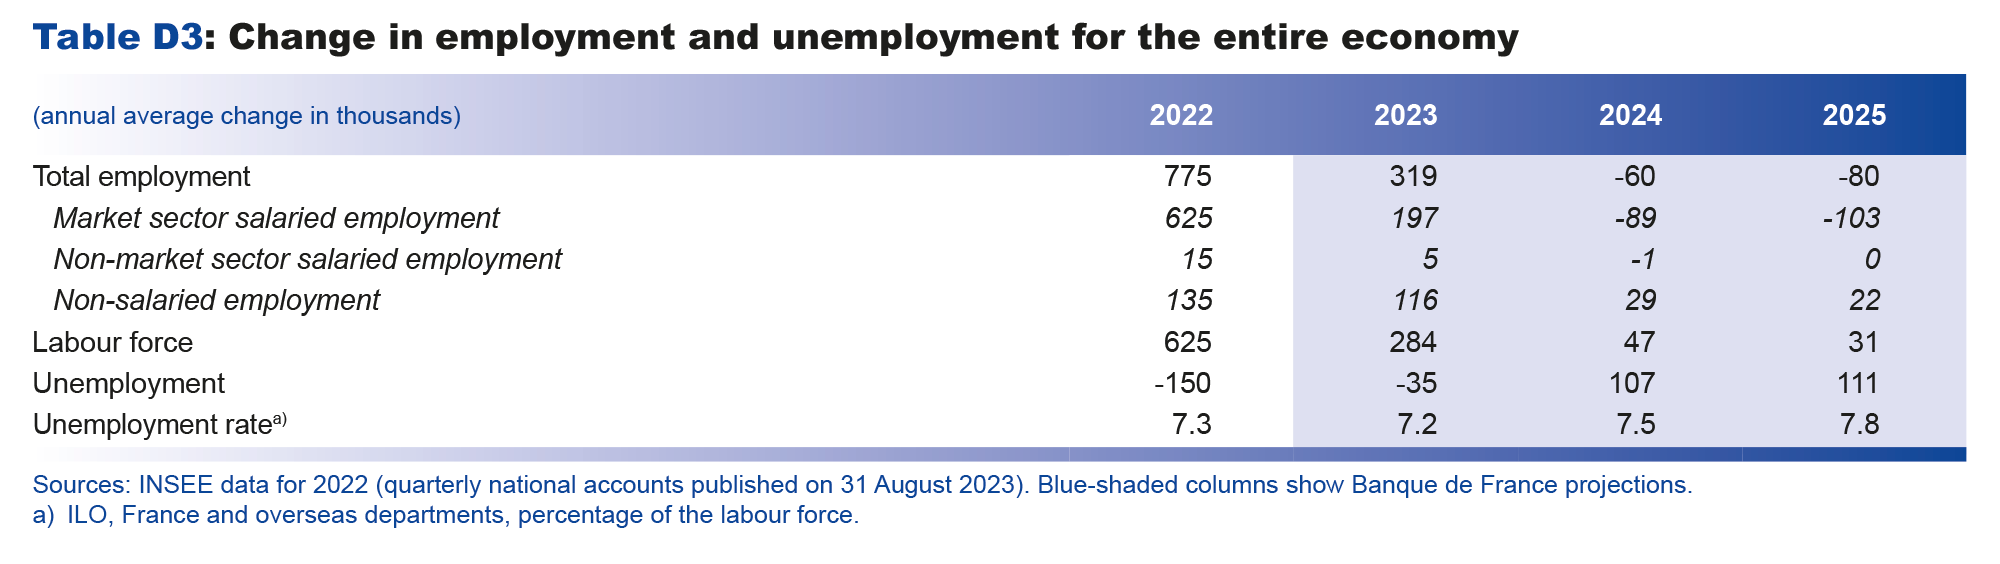  Macroeconomic projections – September 2023 -Change in employment and unemployment in the entire economy